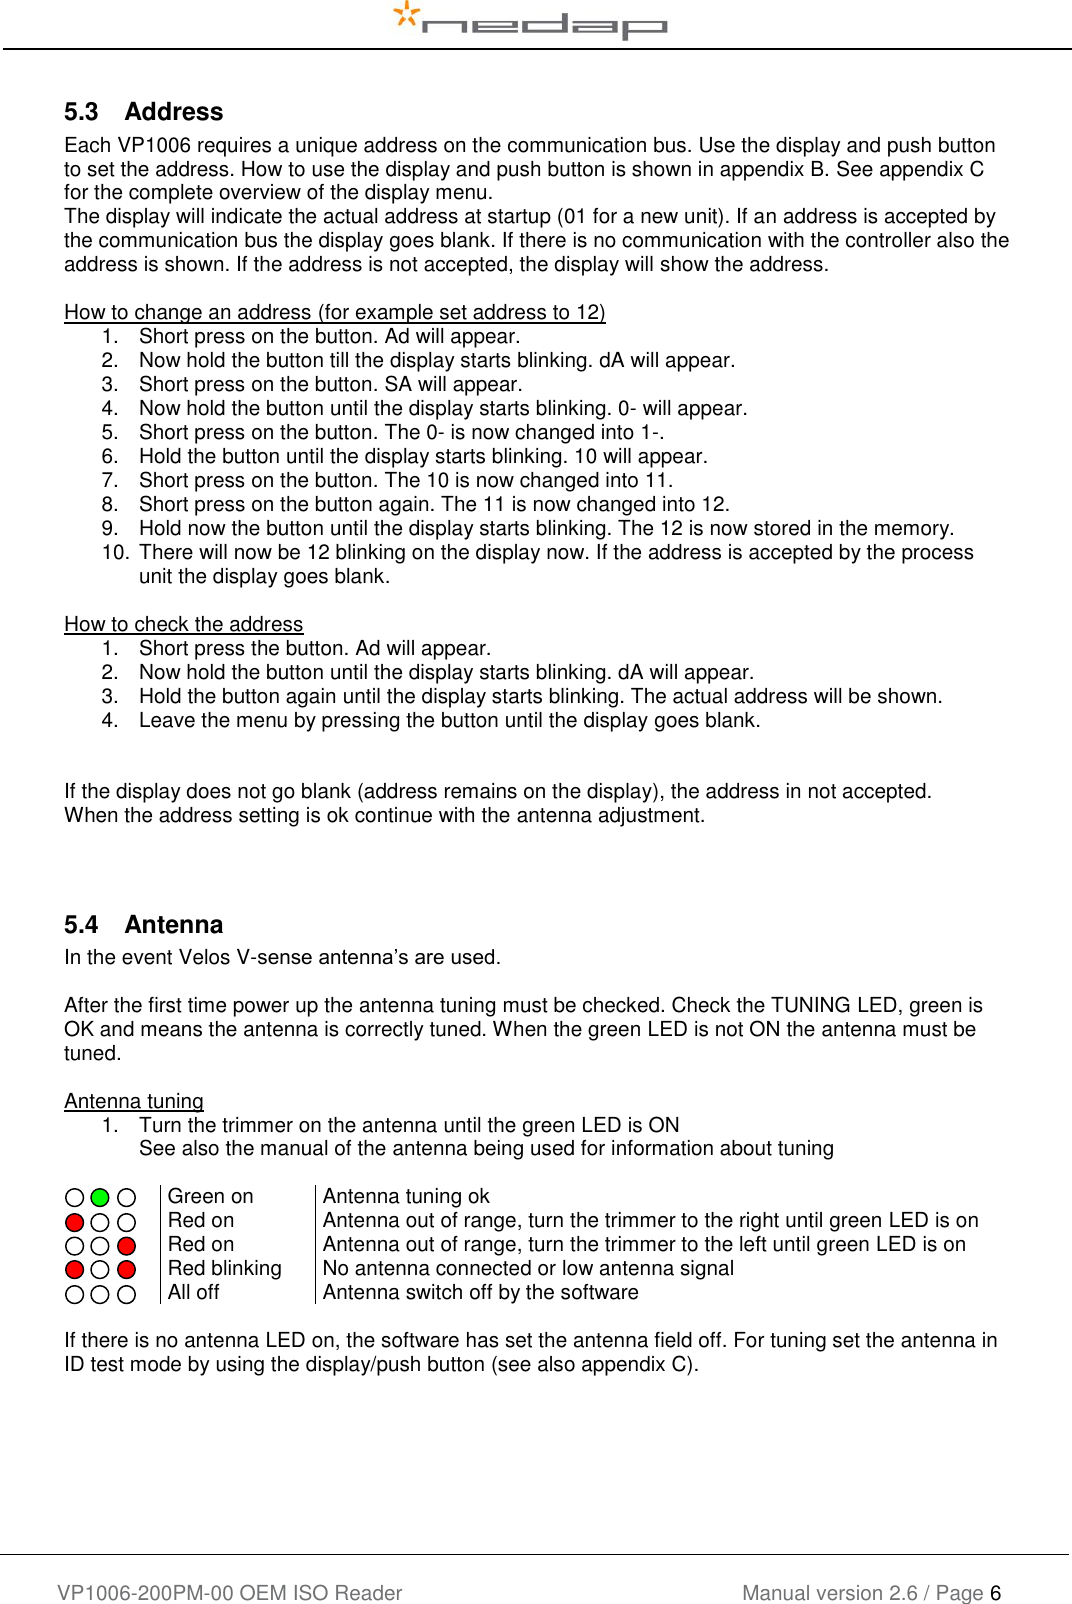    VP1006-200PM-00 OEM ISO Reader Manual version 2.6 / Page 6   5.3  Address Each VP1006 requires a unique address on the communication bus. Use the display and push button to set the address. How to use the display and push button is shown in appendix B. See appendix C for the complete overview of the display menu. The display will indicate the actual address at startup (01 for a new unit). If an address is accepted by the communication bus the display goes blank. If there is no communication with the controller also the address is shown. If the address is not accepted, the display will show the address.  How to change an address (for example set address to 12) 1.  Short press on the button. Ad will appear.  2.  Now hold the button till the display starts blinking. dA will appear. 3.  Short press on the button. SA will appear. 4.  Now hold the button until the display starts blinking. 0- will appear. 5.  Short press on the button. The 0- is now changed into 1-. 6.  Hold the button until the display starts blinking. 10 will appear. 7.  Short press on the button. The 10 is now changed into 11. 8.  Short press on the button again. The 11 is now changed into 12. 9.  Hold now the button until the display starts blinking. The 12 is now stored in the memory. 10. There will now be 12 blinking on the display now. If the address is accepted by the process unit the display goes blank.  How to check the address 1.  Short press the button. Ad will appear.  2.  Now hold the button until the display starts blinking. dA will appear. 3.  Hold the button again until the display starts blinking. The actual address will be shown. 4.  Leave the menu by pressing the button until the display goes blank.   If the display does not go blank (address remains on the display), the address in not accepted. When the address setting is ok continue with the antenna adjustment.   5.4  Antenna In the event Velos V-sense antenna’s are used.  After the first time power up the antenna tuning must be checked. Check the TUNING LED, green is OK and means the antenna is correctly tuned. When the green LED is not ON the antenna must be tuned.  Antenna tuning 1.  Turn the trimmer on the antenna until the green LED is ON See also the manual of the antenna being used for information about tuning       Green on Antenna tuning ok      Red on Antenna out of range, turn the trimmer to the right until green LED is on      Red on Antenna out of range, turn the trimmer to the left until green LED is on      Red blinking No antenna connected or low antenna signal      All off Antenna switch off by the software  If there is no antenna LED on, the software has set the antenna field off. For tuning set the antenna in ID test mode by using the display/push button (see also appendix C).      